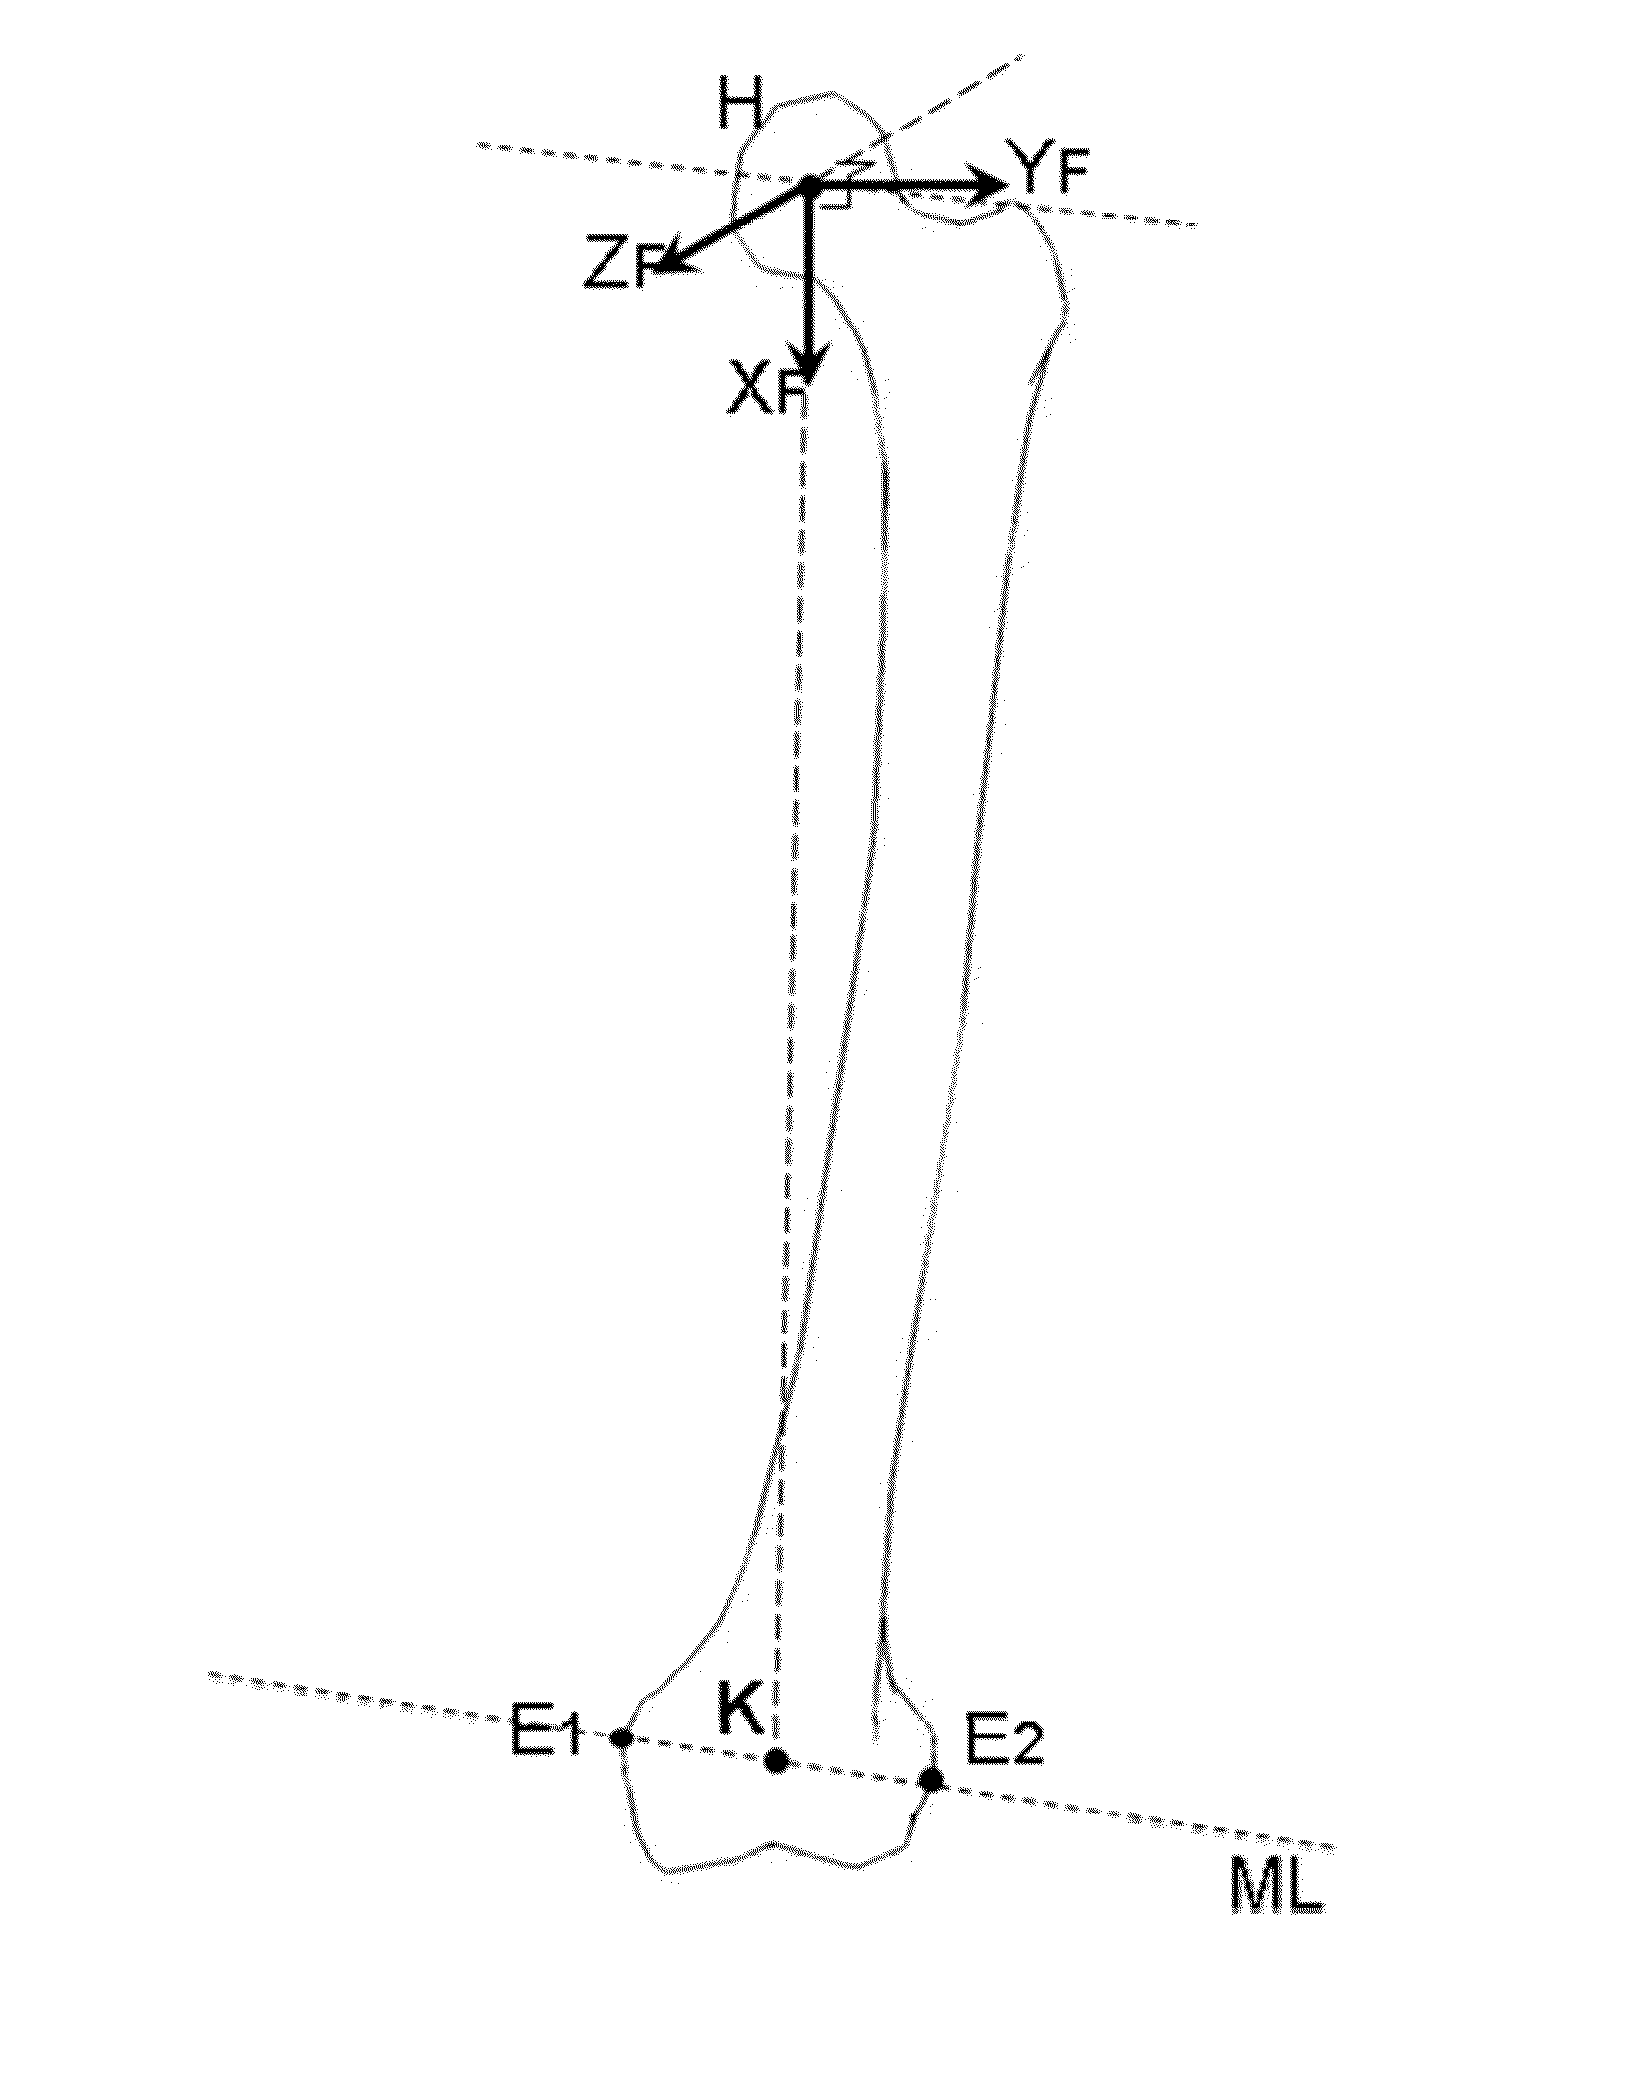 Method for determining articular bone deformity resection using motion patterns